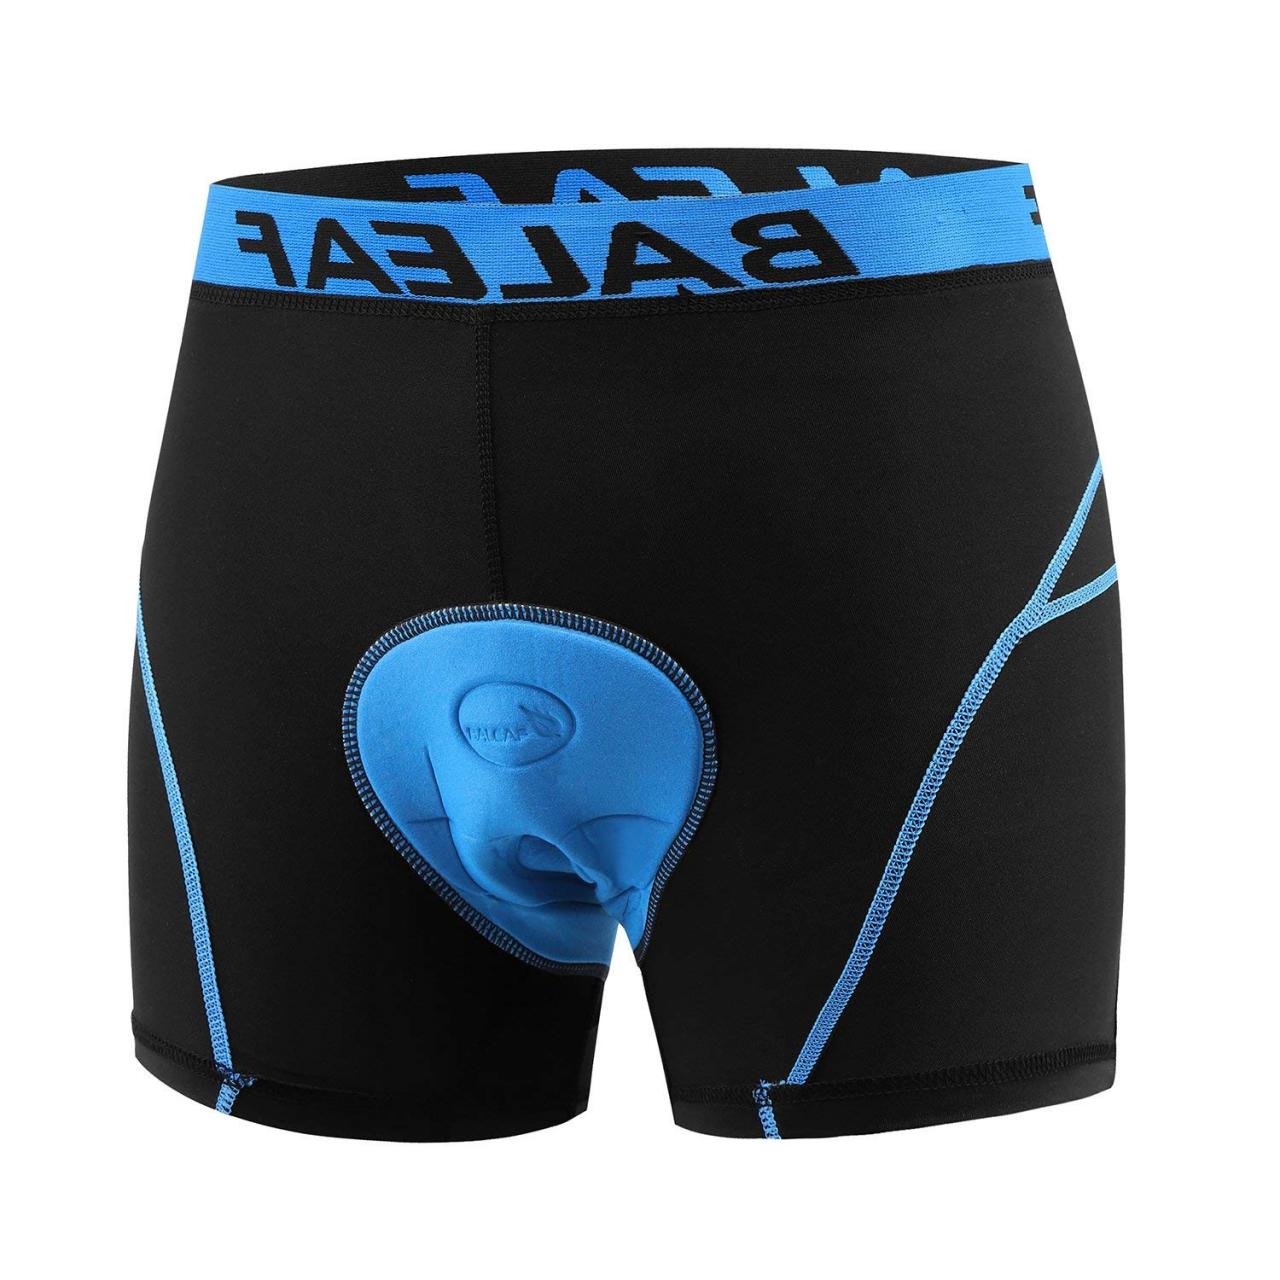 Buy Baleaf Men's 3D Padded Bike Bicycle MTB Cycling Underwear Shorts at  Amazon.in